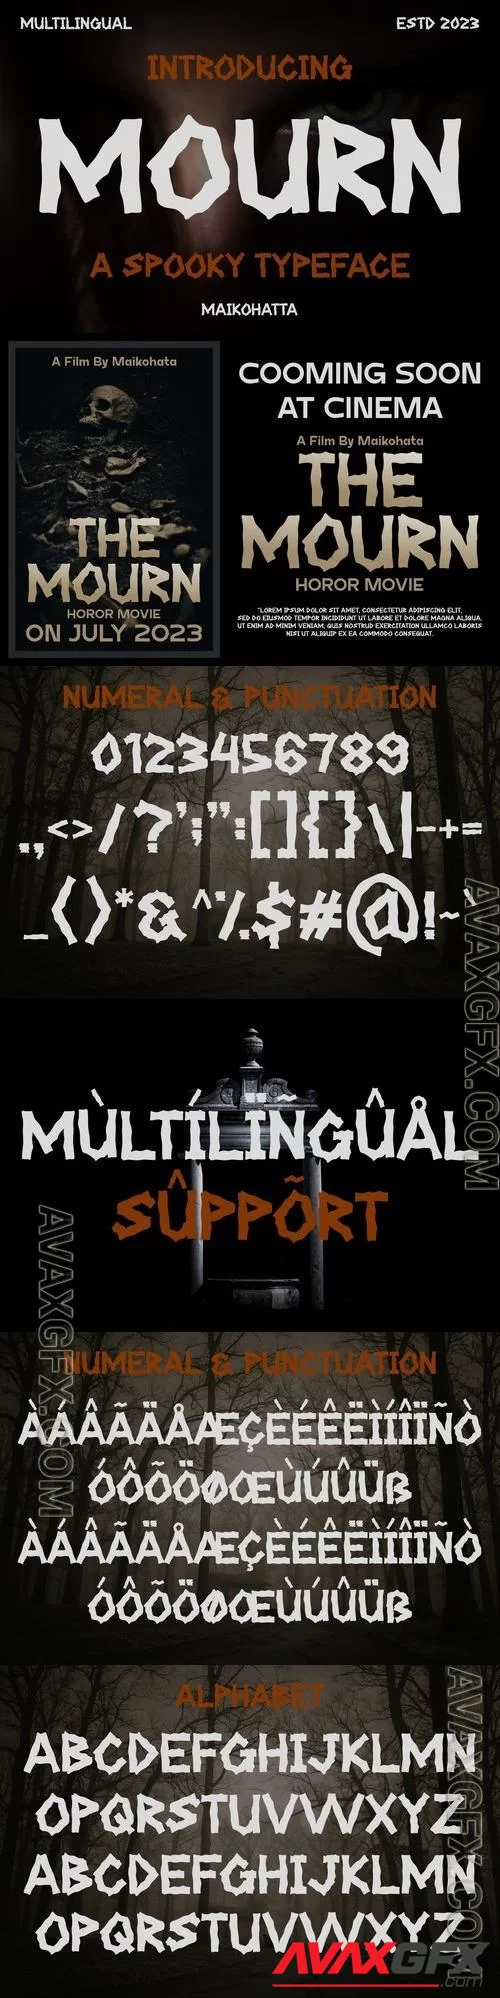 Mourn - Spooky Typeface Font